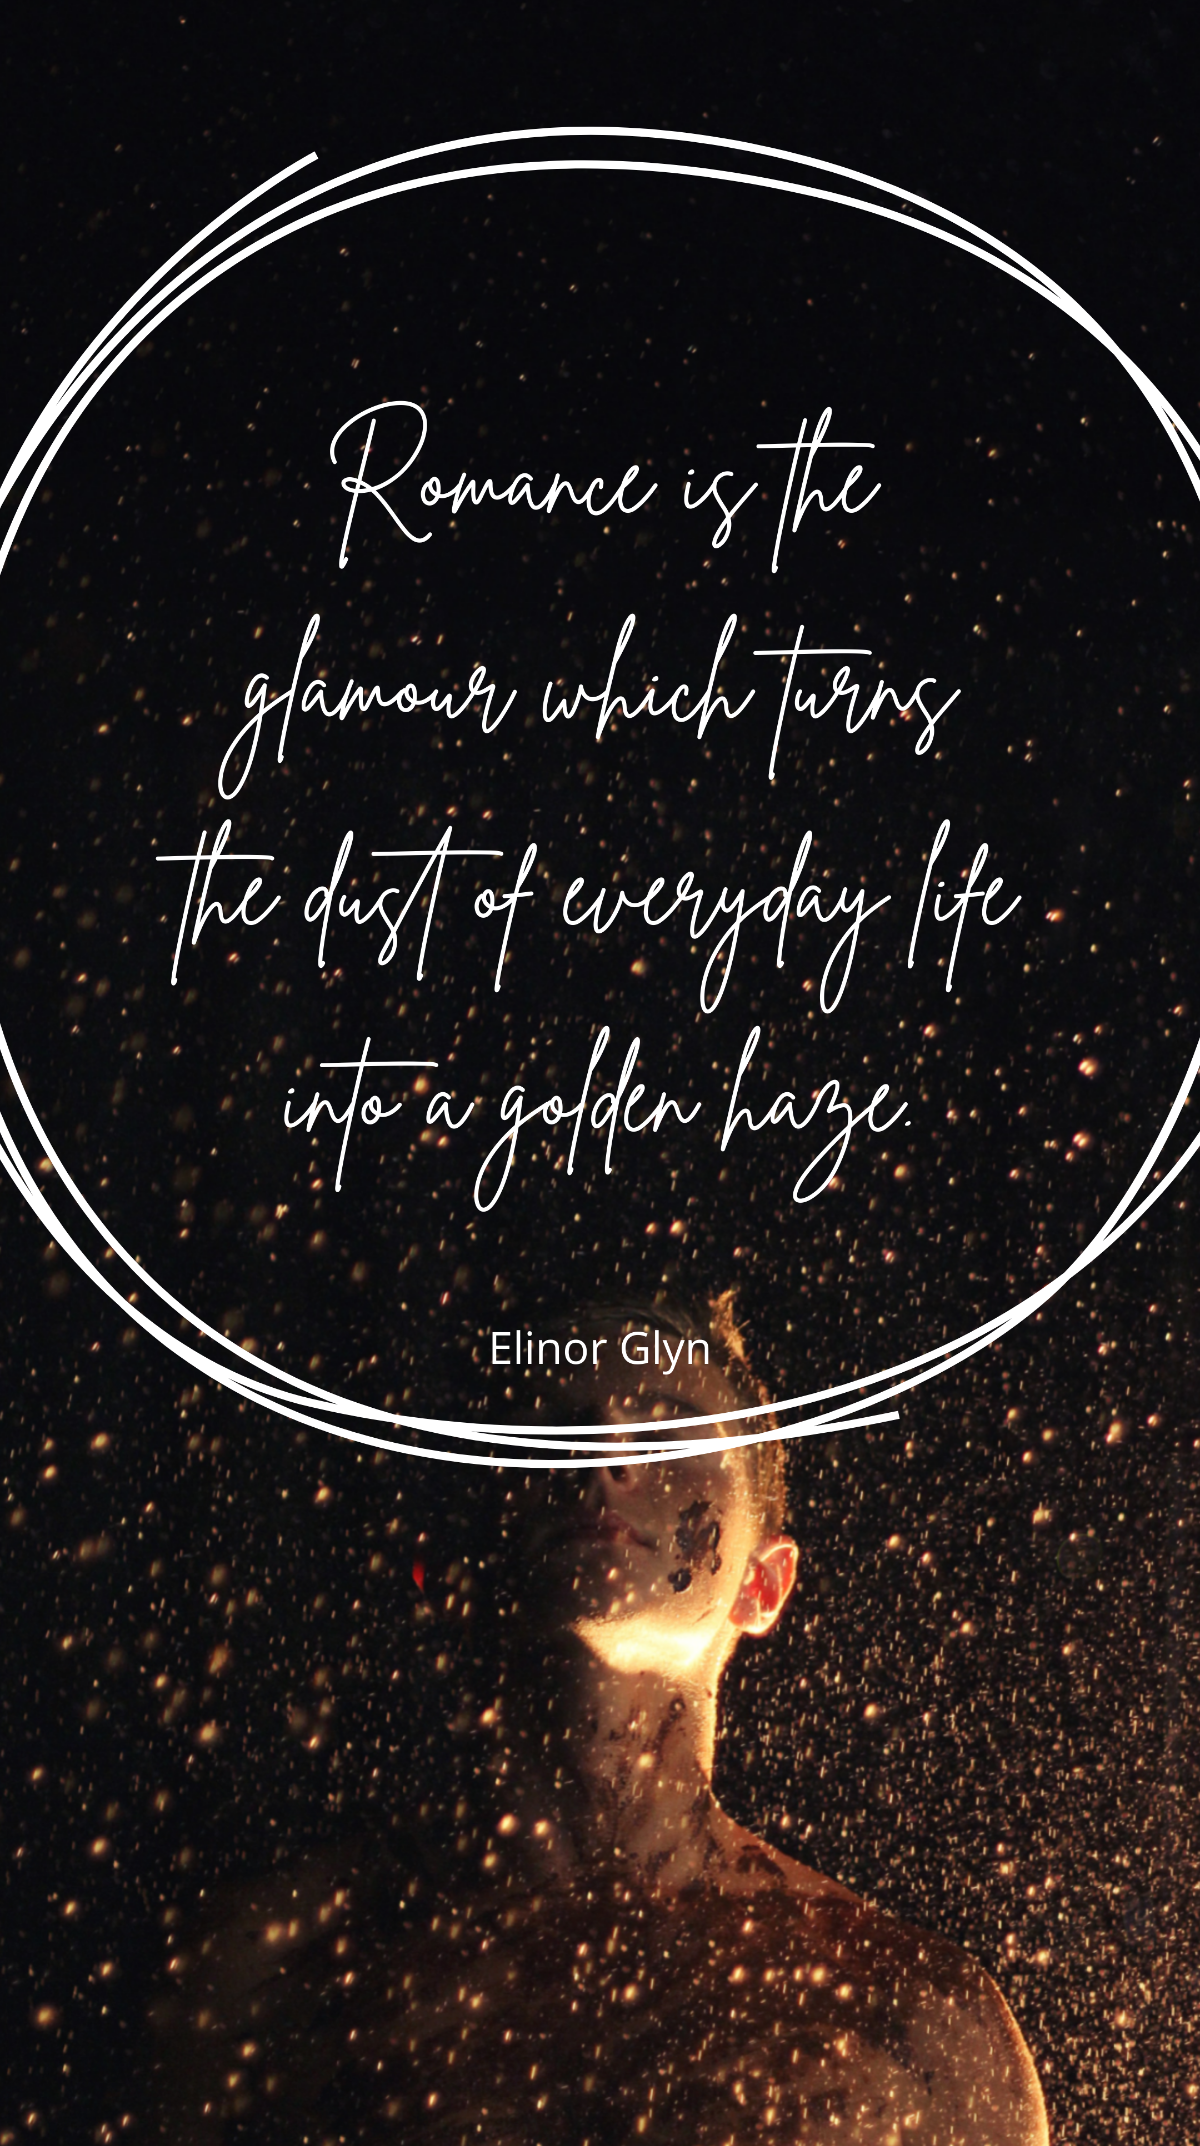 Elinor Glyn - “Romance is the glamour which turns the dust of everyday life into a golden haze.” Template